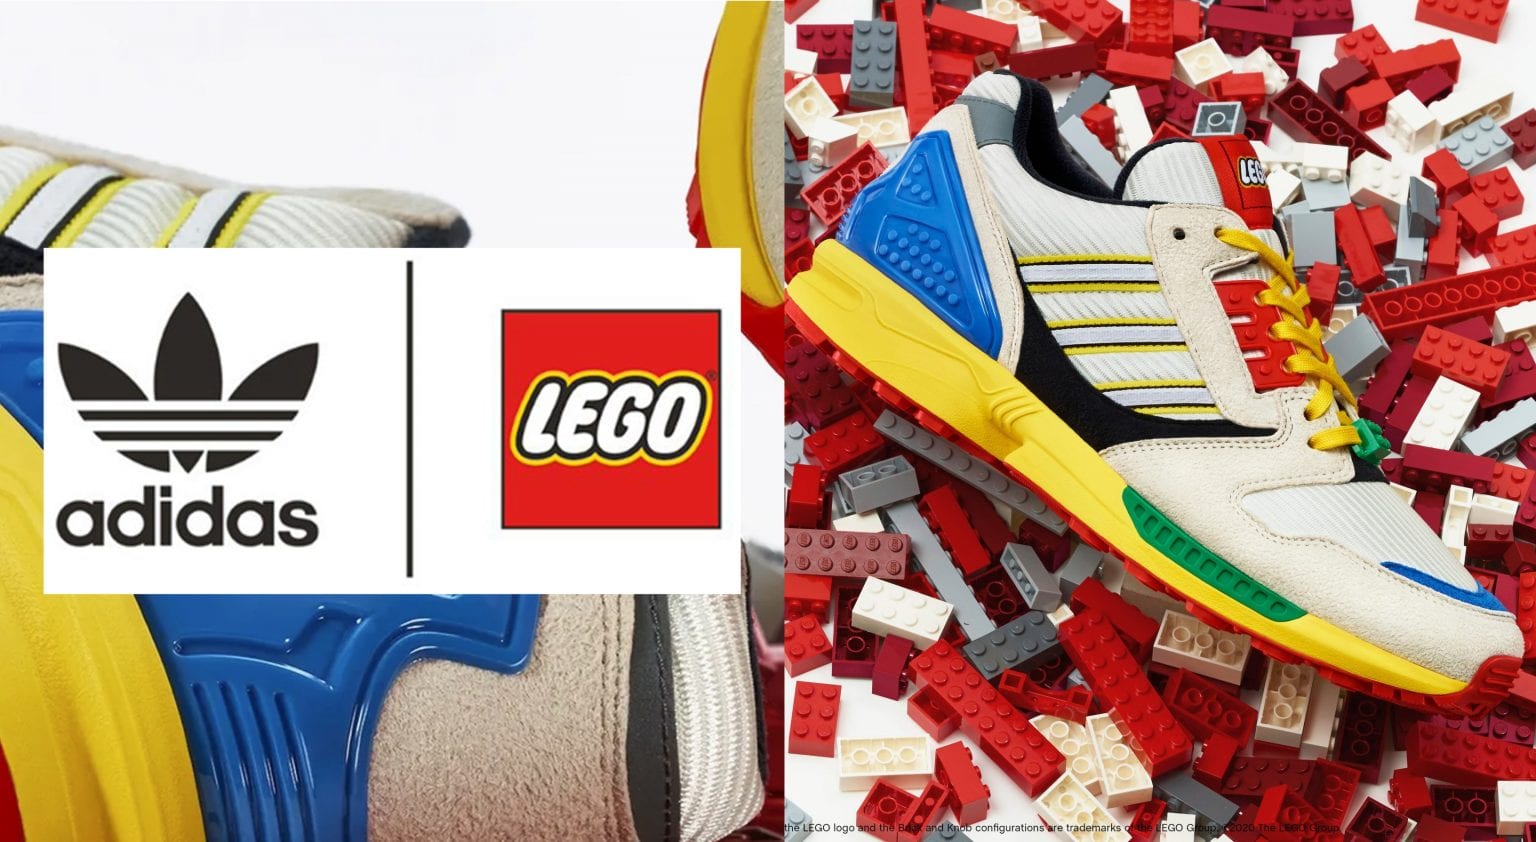 LEGO Is Partnering Up With Adidas To Give You Some Super Cool Kicks